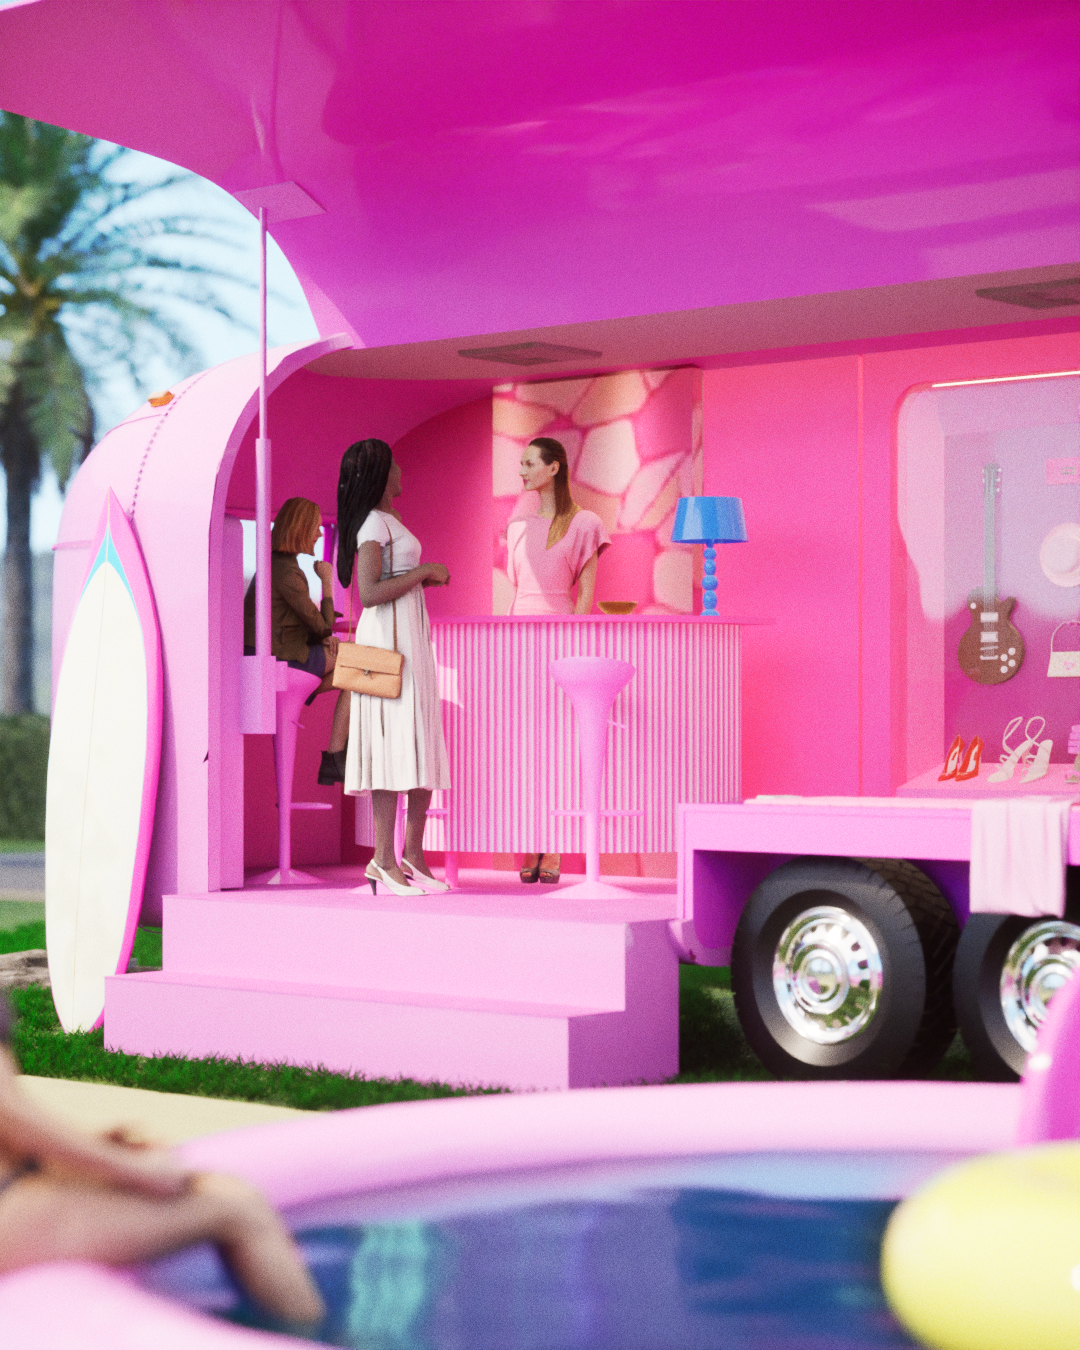 A guest and brand ambassador conversing inside of the Barbie mobile pop-up truck